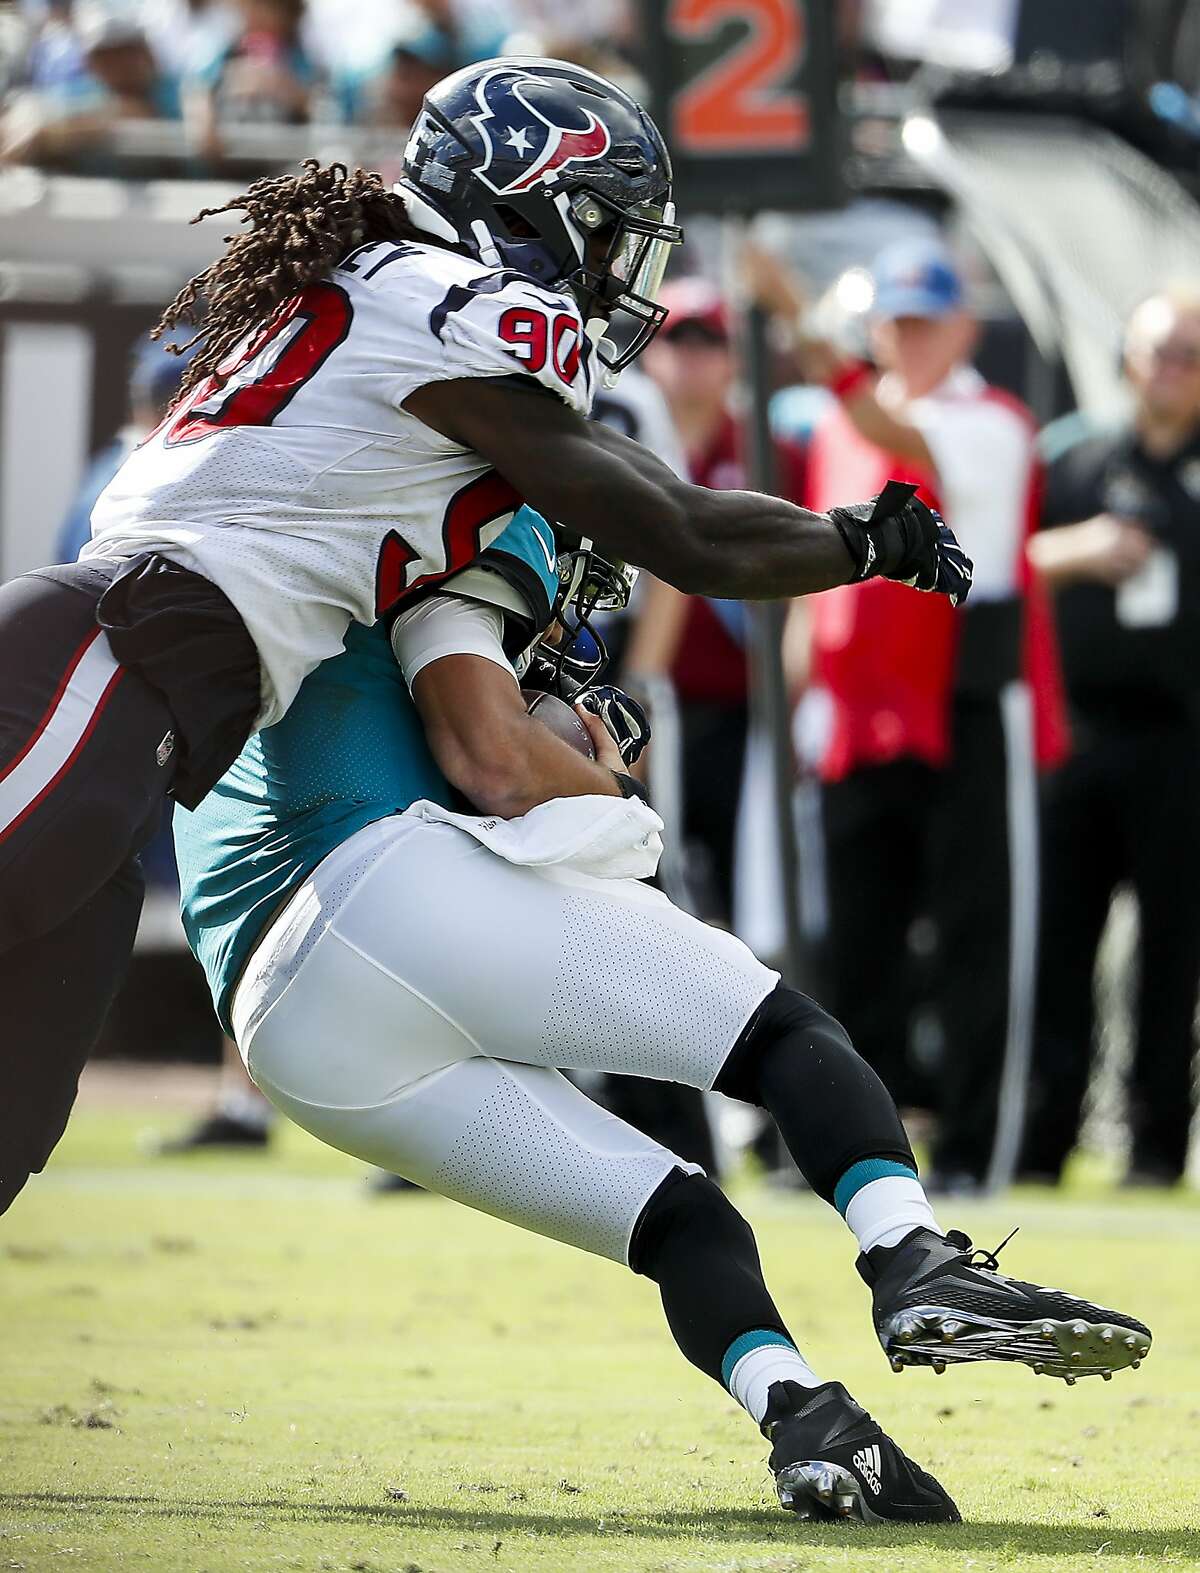 5. JADEVEON CLOWNEY, DEFENSIVE END (HOUSTON TEXANS) CONTRACT SITUATION: Texans slapped Clowney with franchise tag for 2019 season, but he has yet to sign it; skipped the team's veteran minicamp.